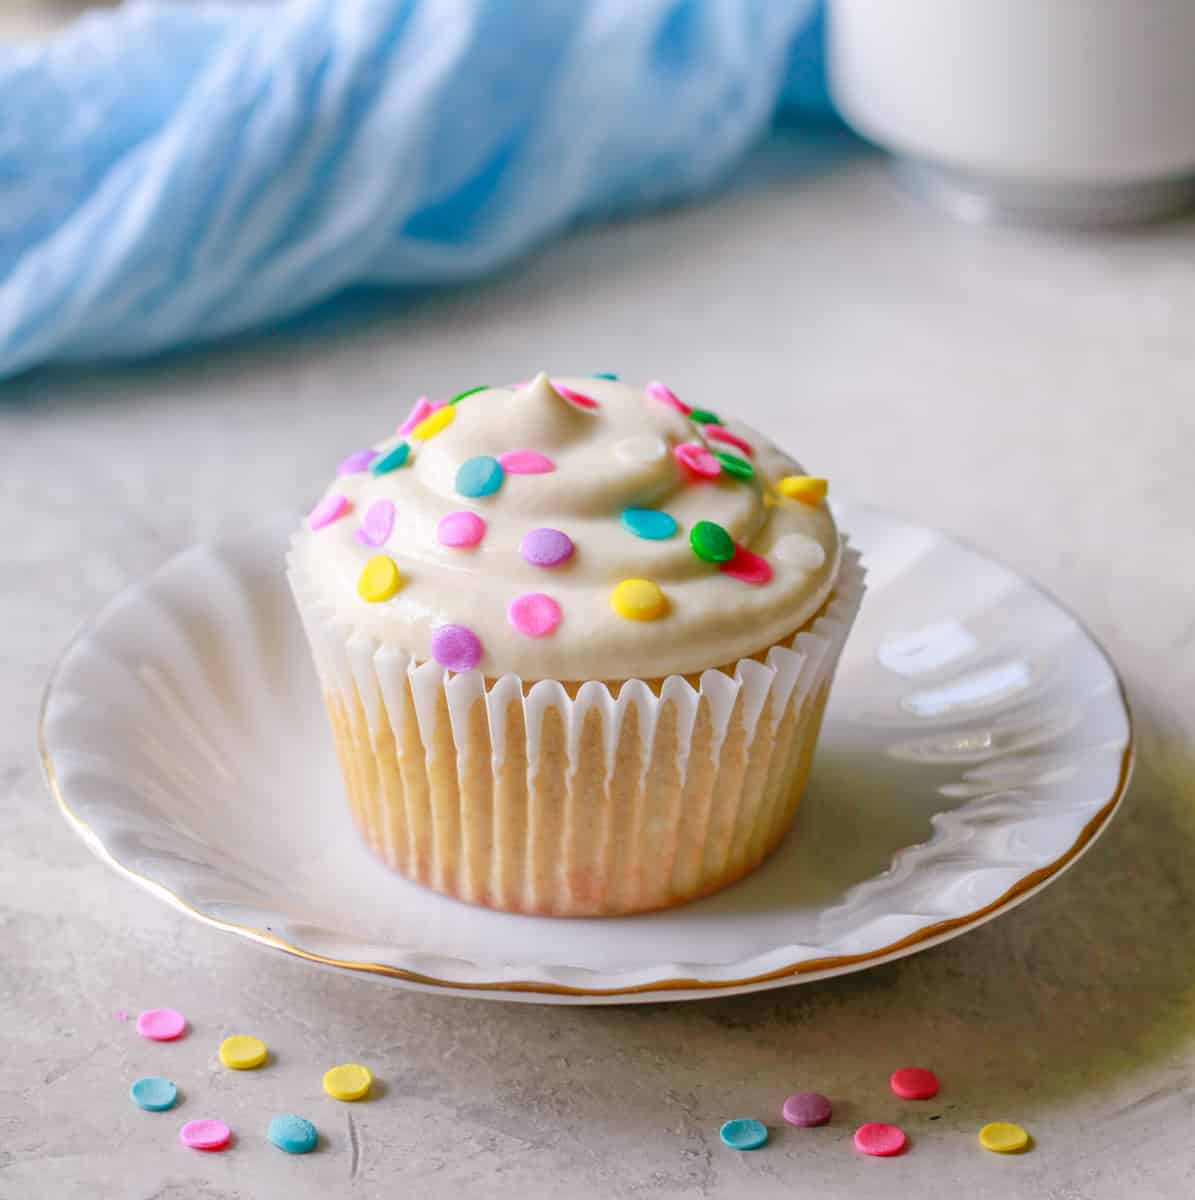 a close-up shot of a vanilla protein cupcake with frosting and sprinkles